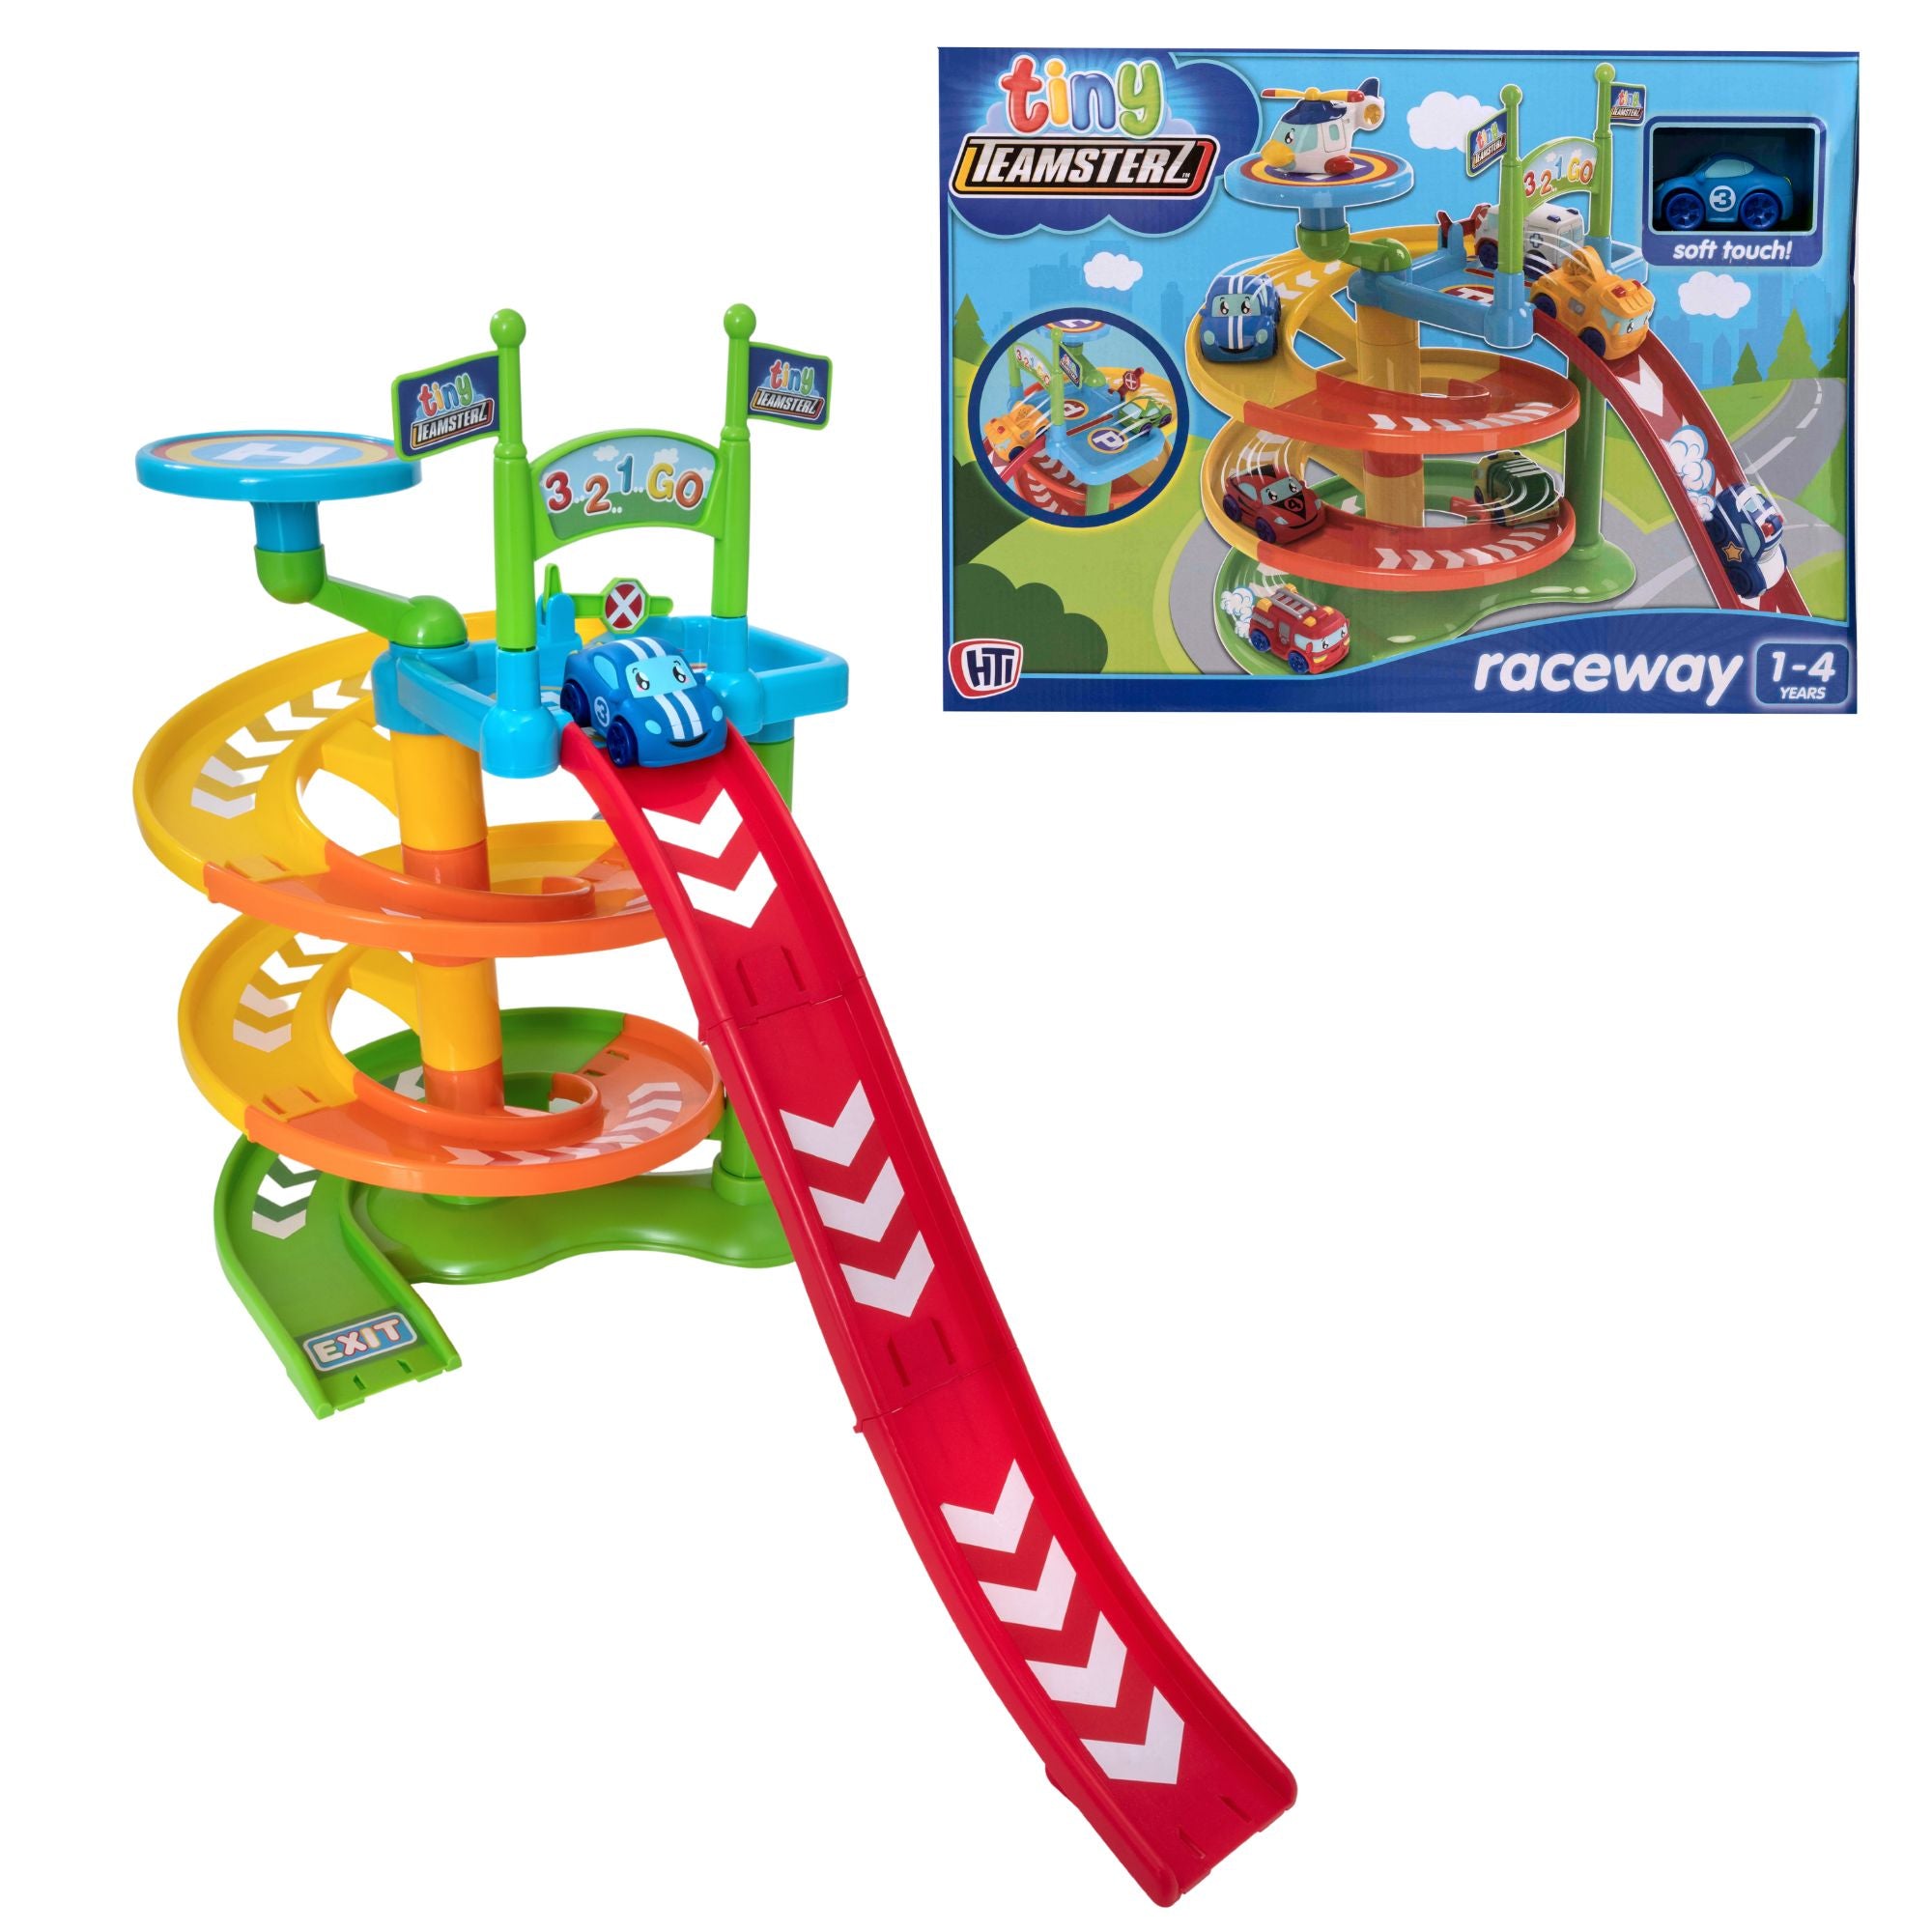 Tiny Teamsterz Spiral Raceway Launcher - Includes 1 Soft Touch Car from Wowow Toys